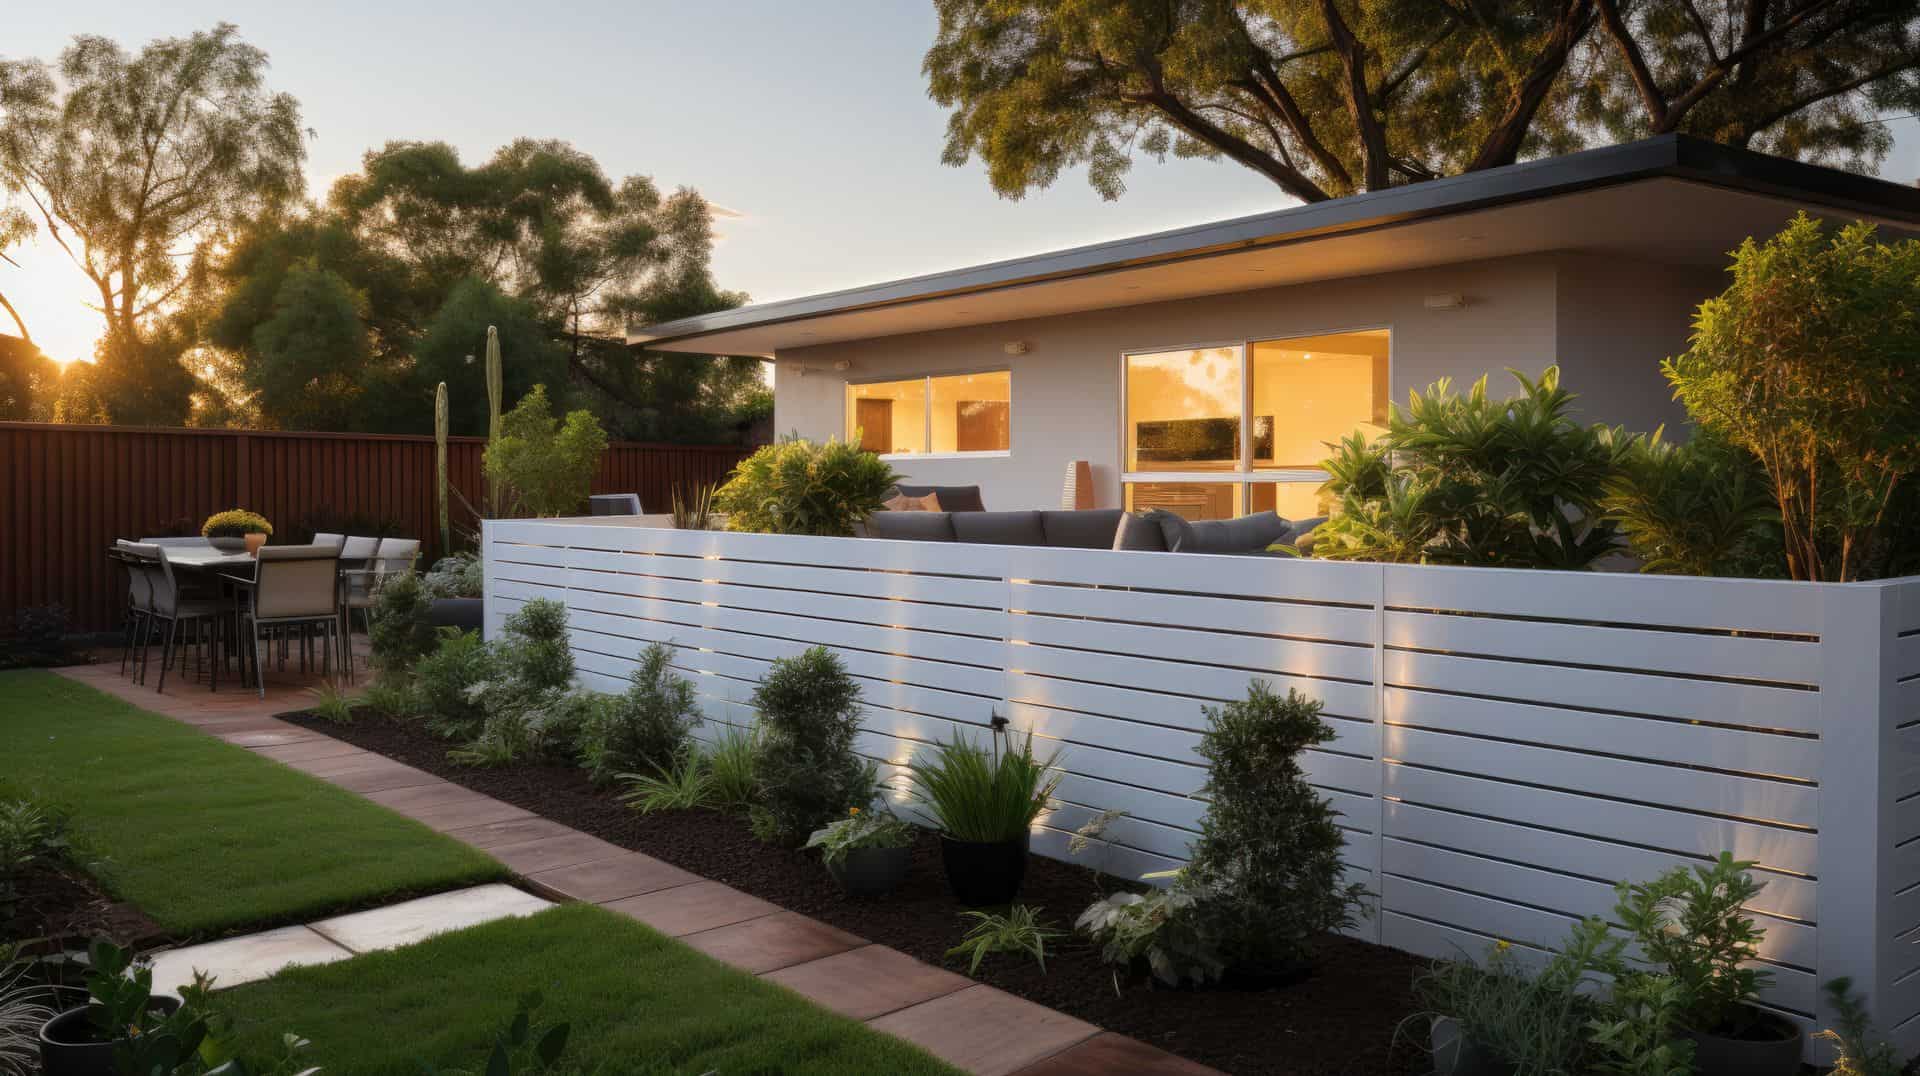 Vinyl semi-privacy fence surrounding small garden & grassy lawn, leading to a concrete walkway of Modern suburban house